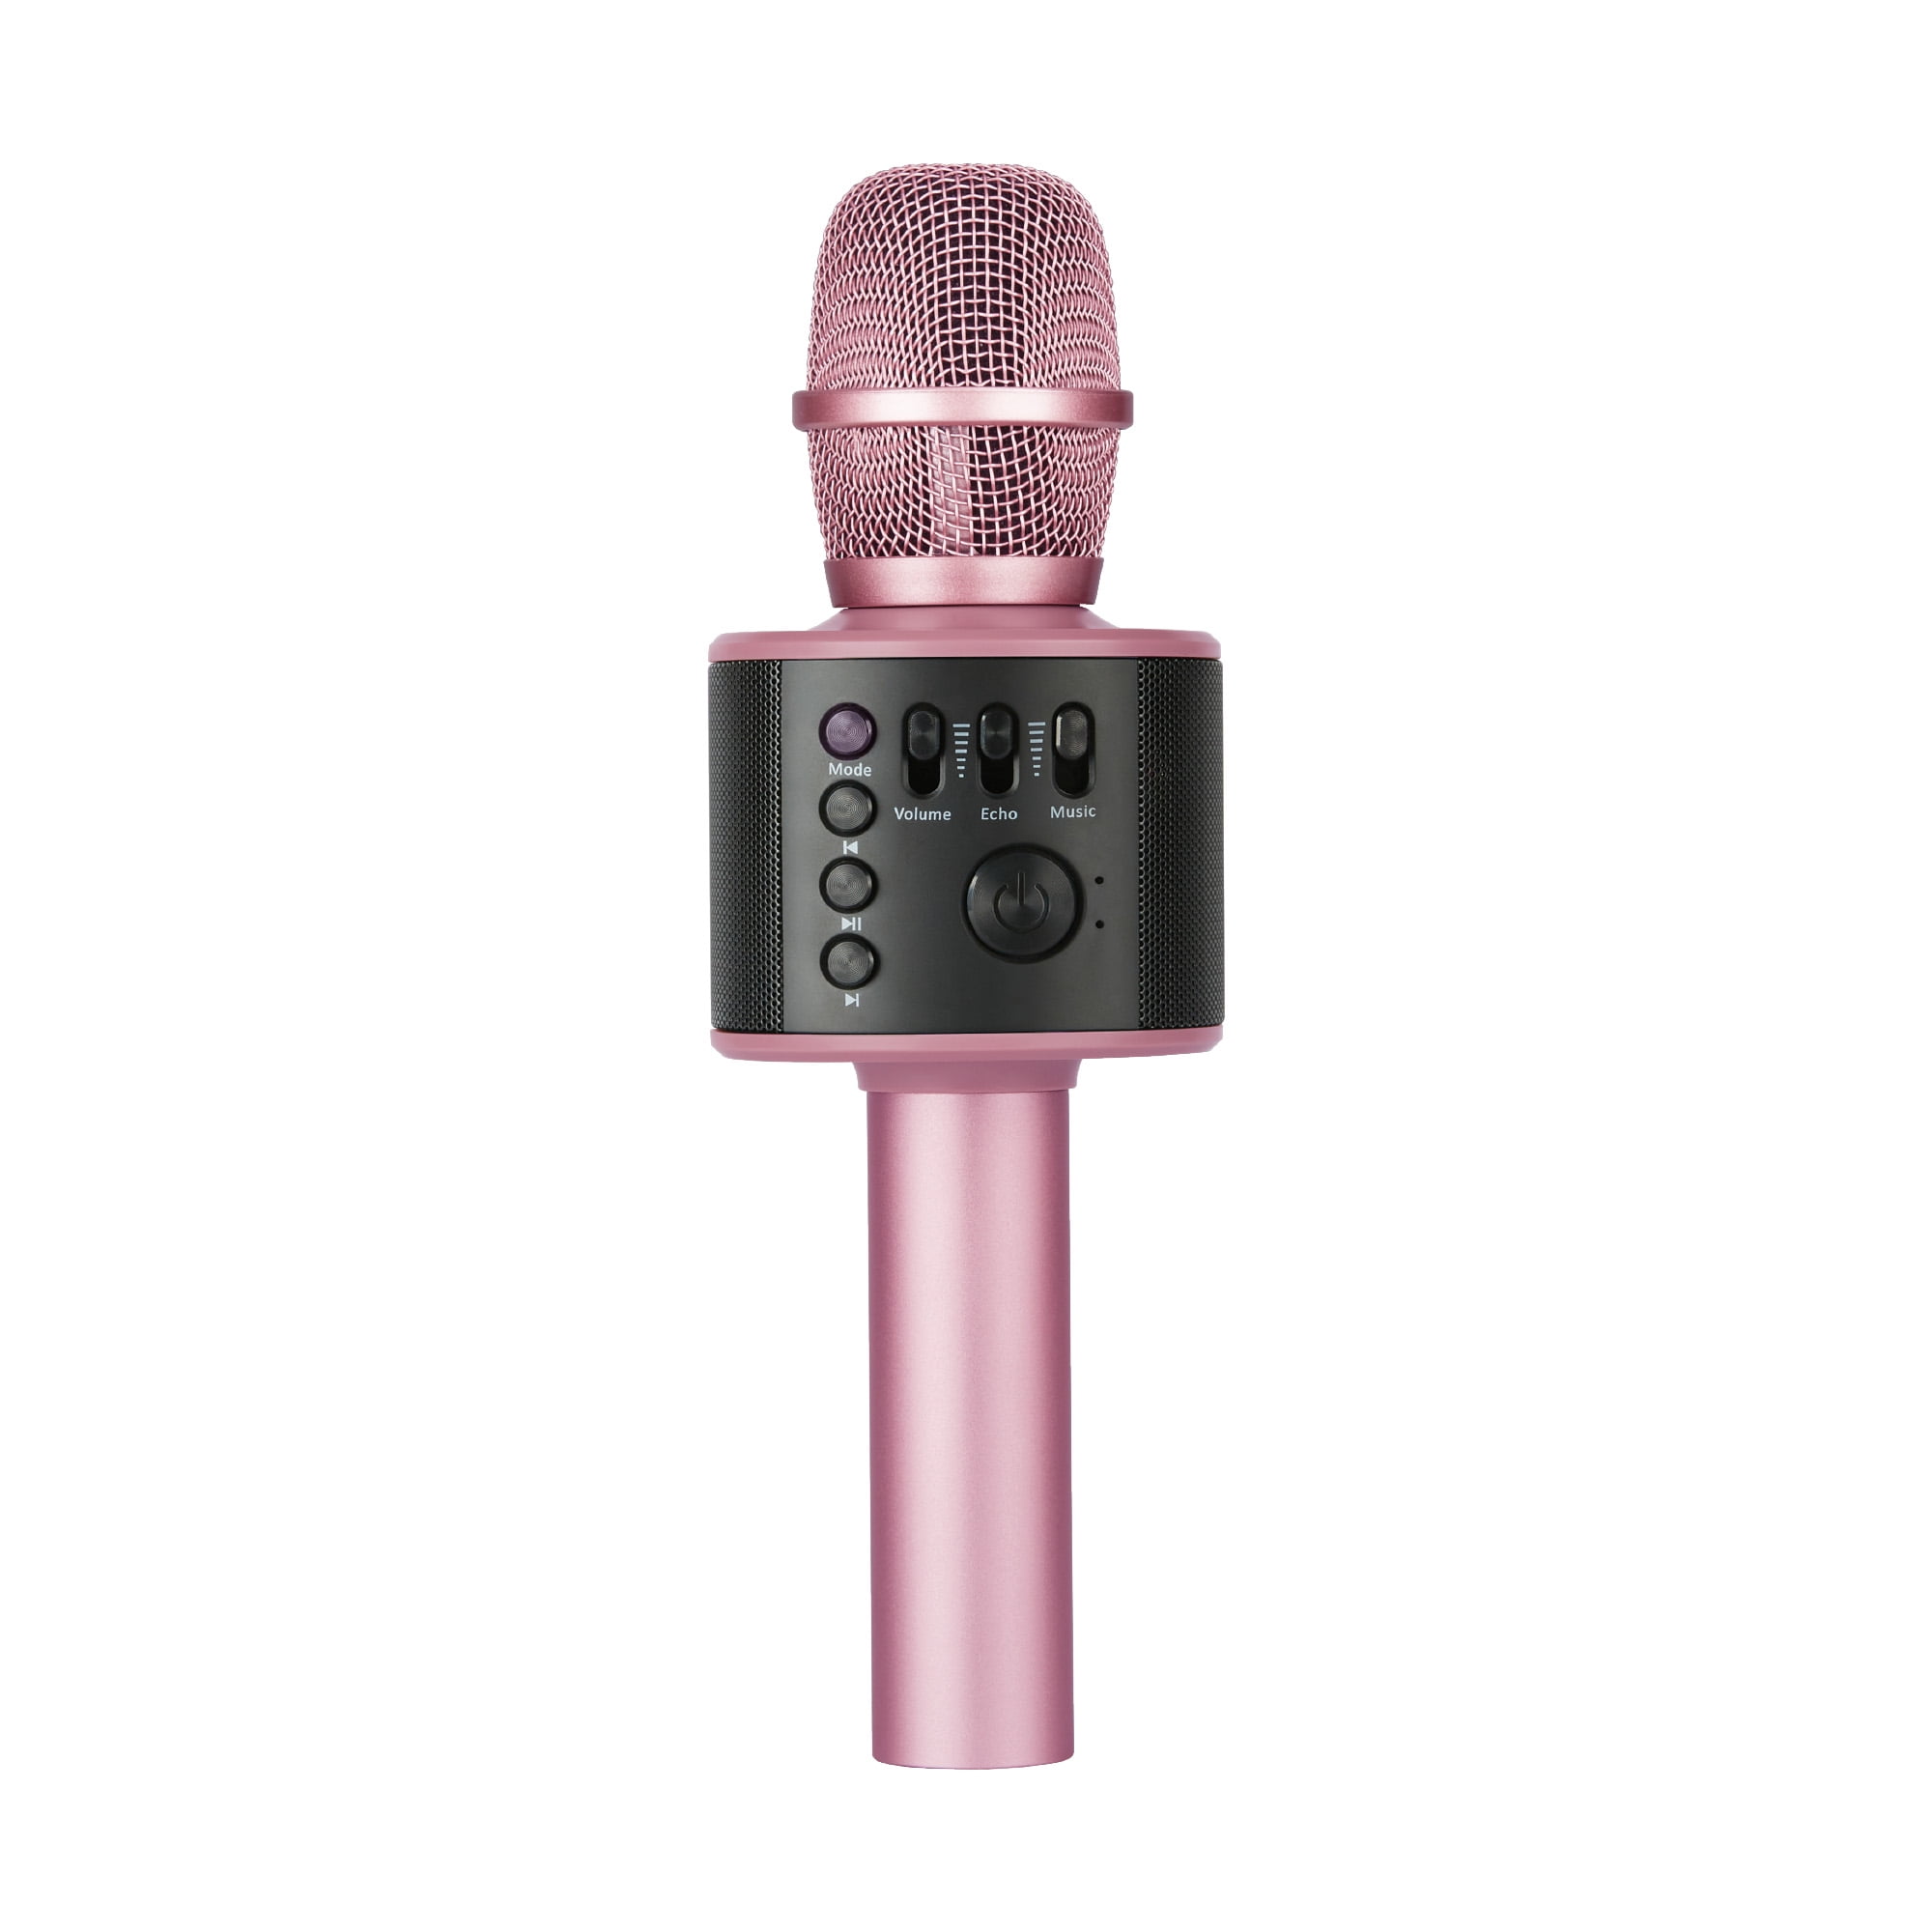 Core Innovations Wireless Bluetooth Karaoke Microphone with Built-in  Speakers + HD Recording